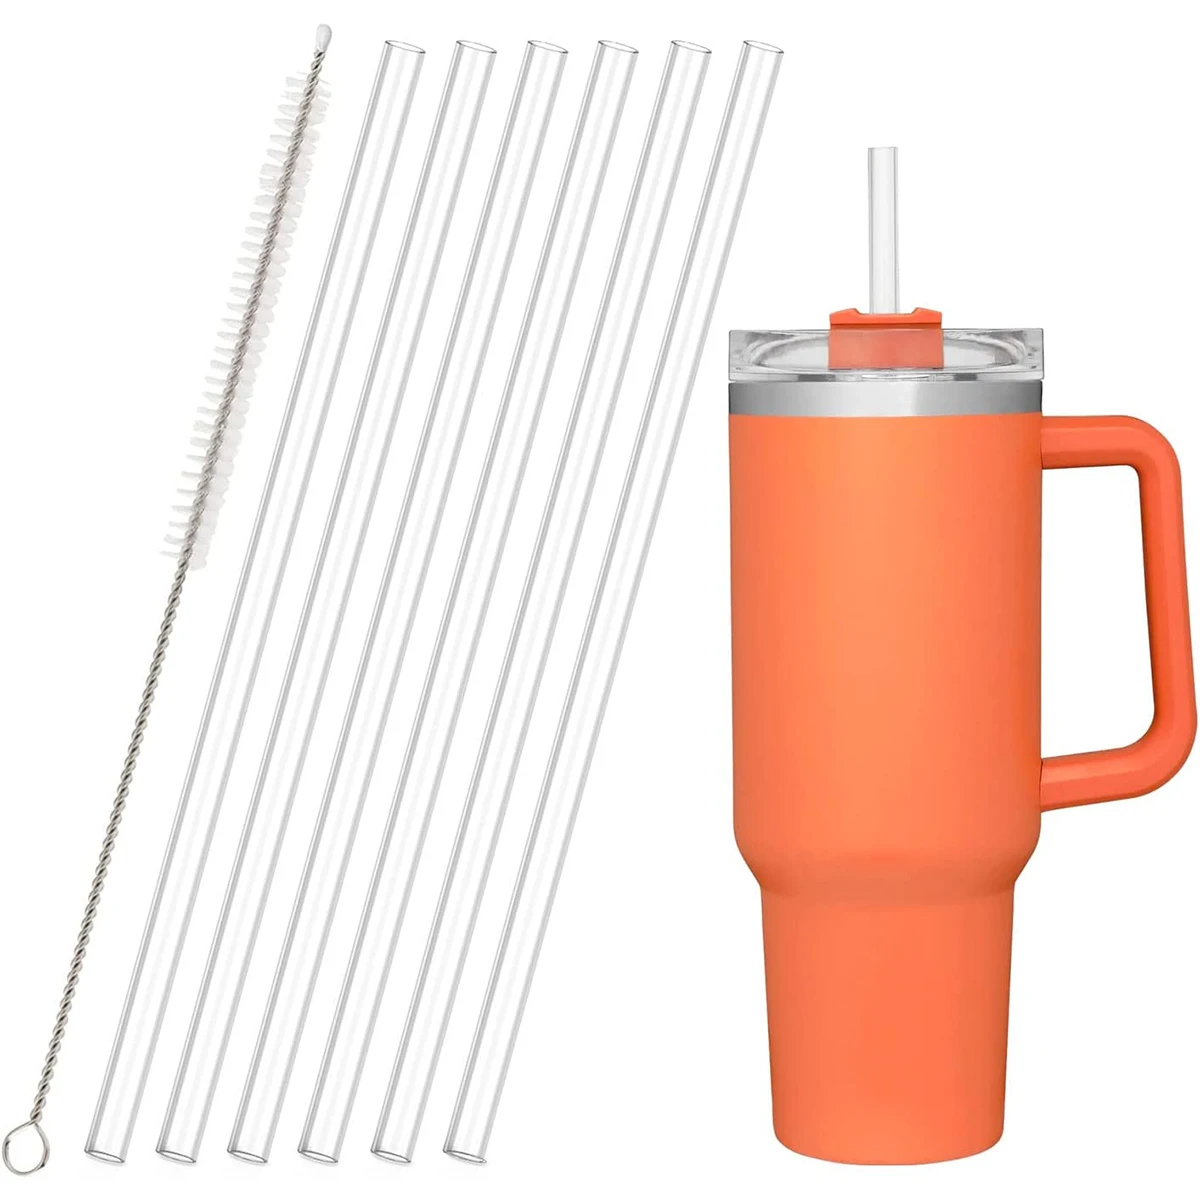 https://ae01.alicdn.com/kf/S83072c735a7241f99d756bdb949f1cfd2/6Pack-Replacement-Straws-for-Stanley-Cup-Adventure-Quencher-Travel-Tumbler-with-Cleaning-Brush-for-Stanely-Cup.jpg